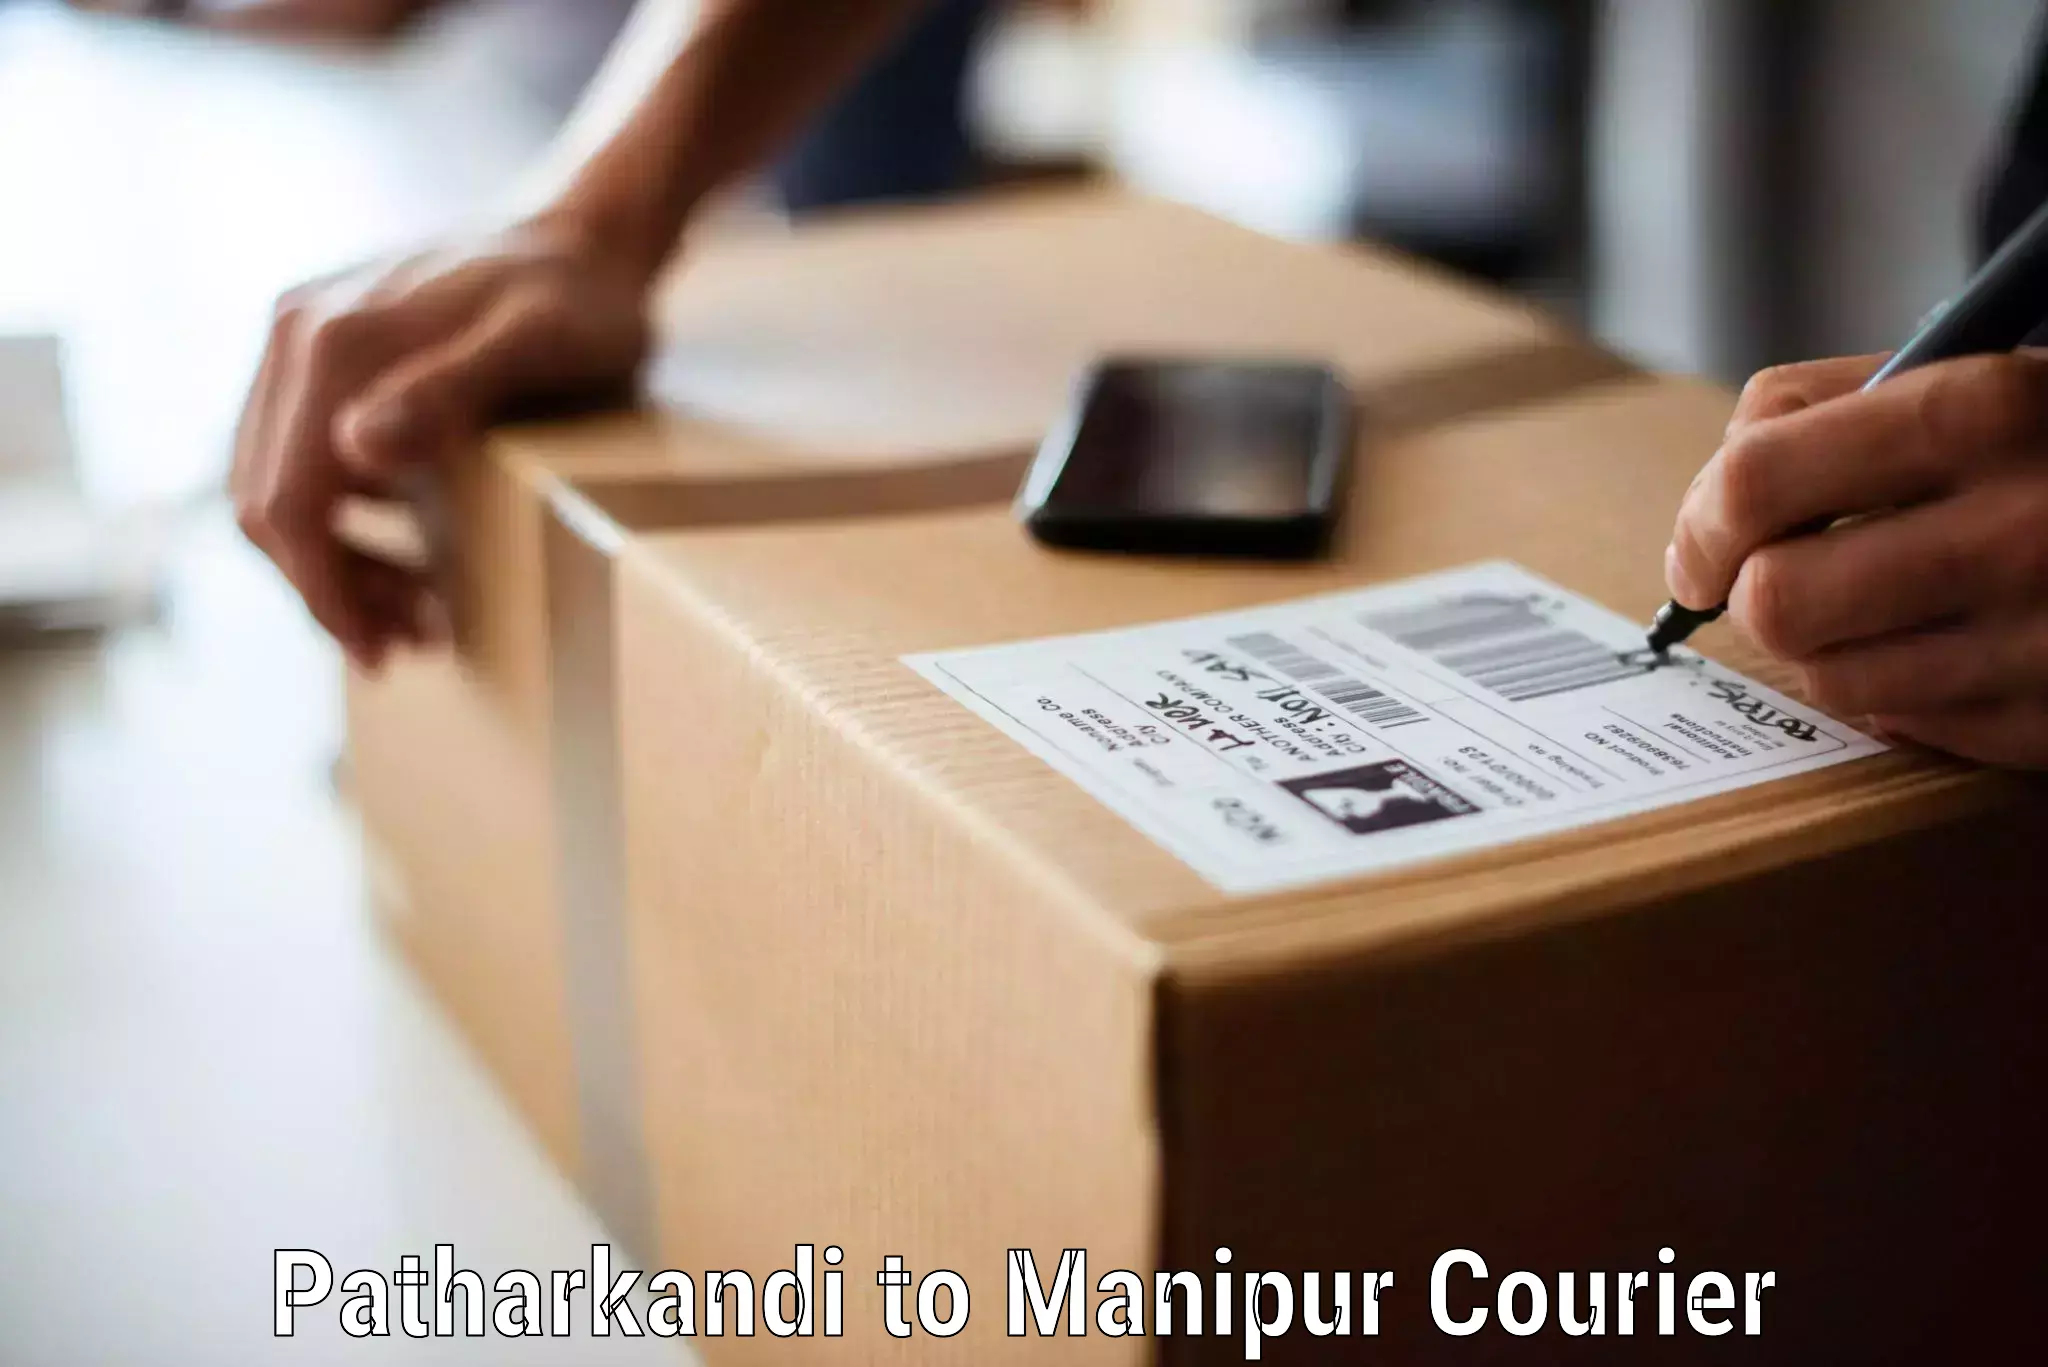 Professional movers and packers Patharkandi to Manipur